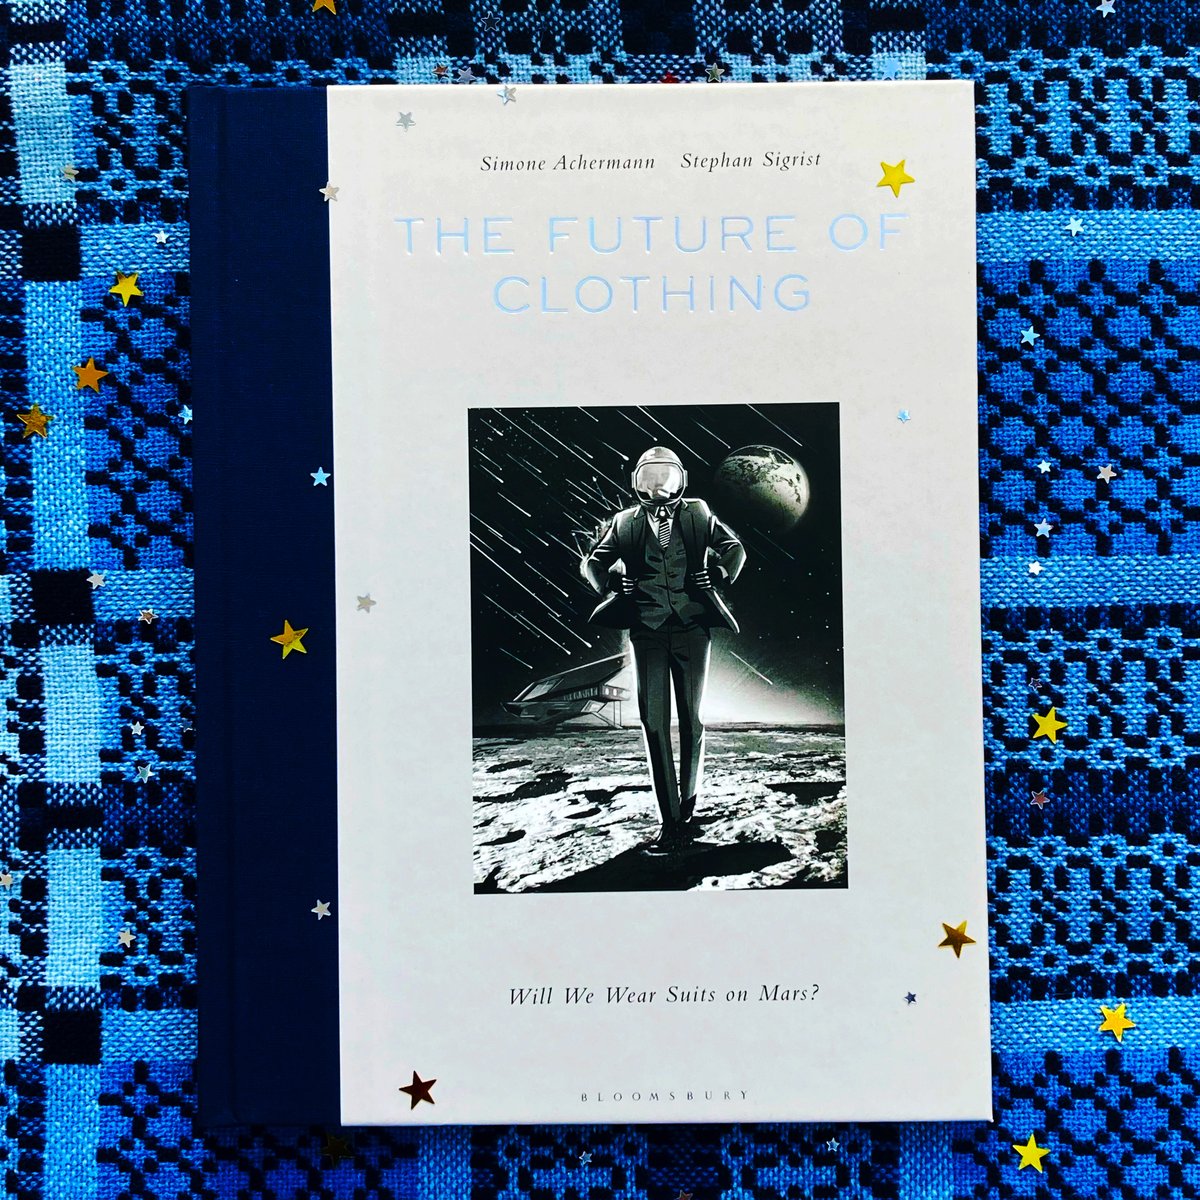 From AI to wearable tech, where is the fashion industry going…? 9 experts give their views, alongside Salvador Dali’s extraordinary vision of how clothing might evolve in the 21st century.

📘 bit.ly/3oD2M3N

#fashiondesign #futurefashion #newfashion #fashionbook